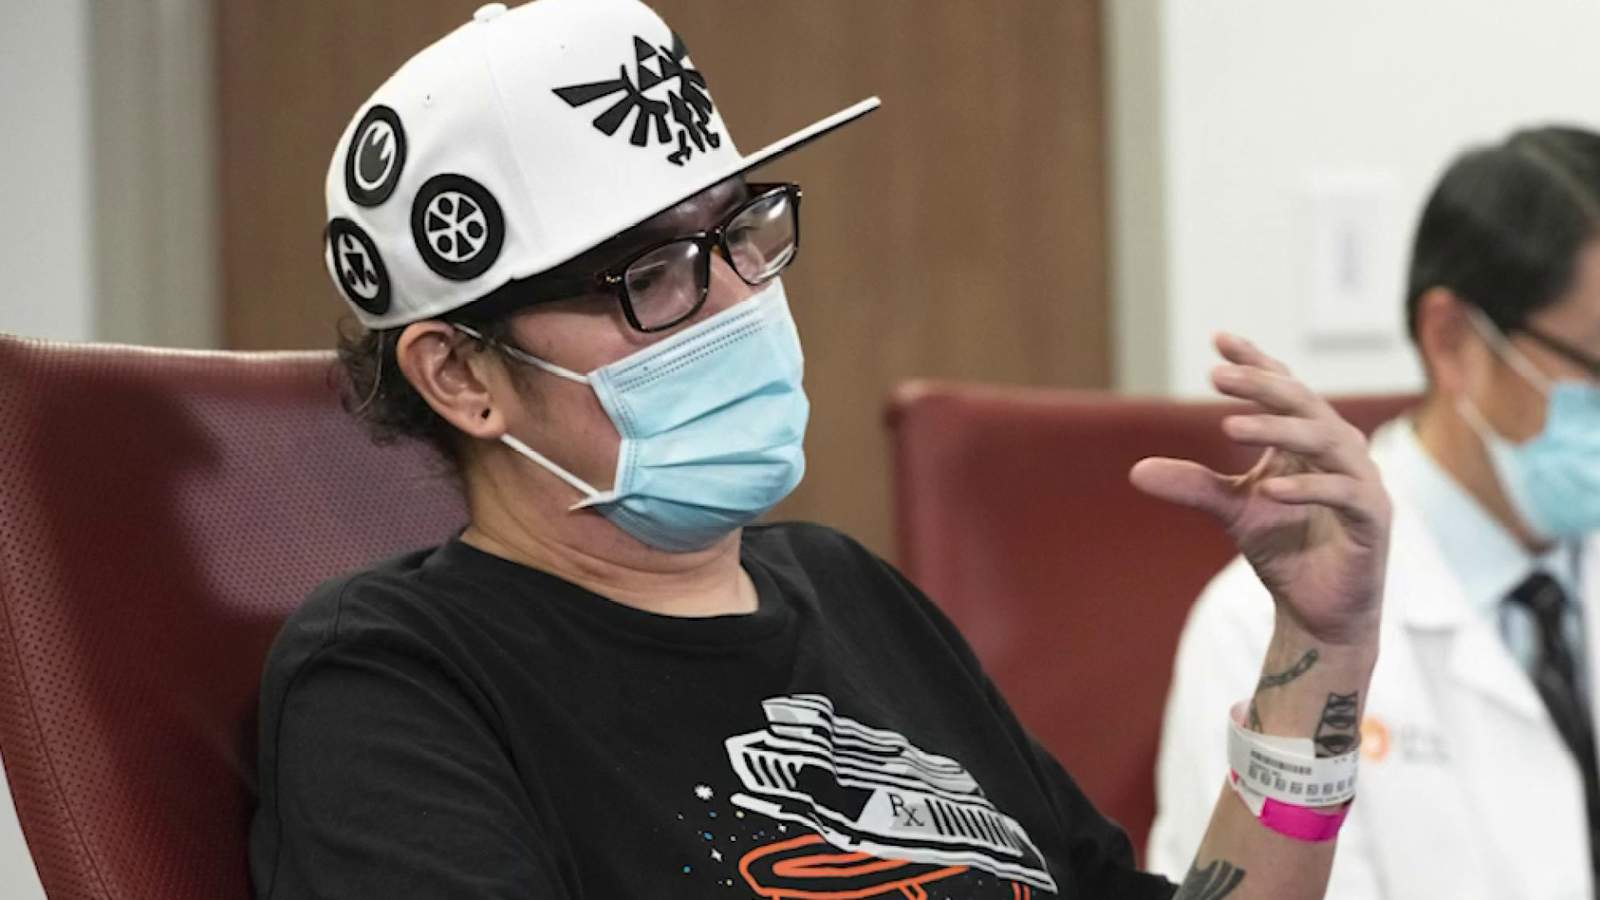 South Texas man who received COVID-19 double-lung transplant urges public to take virus seriously